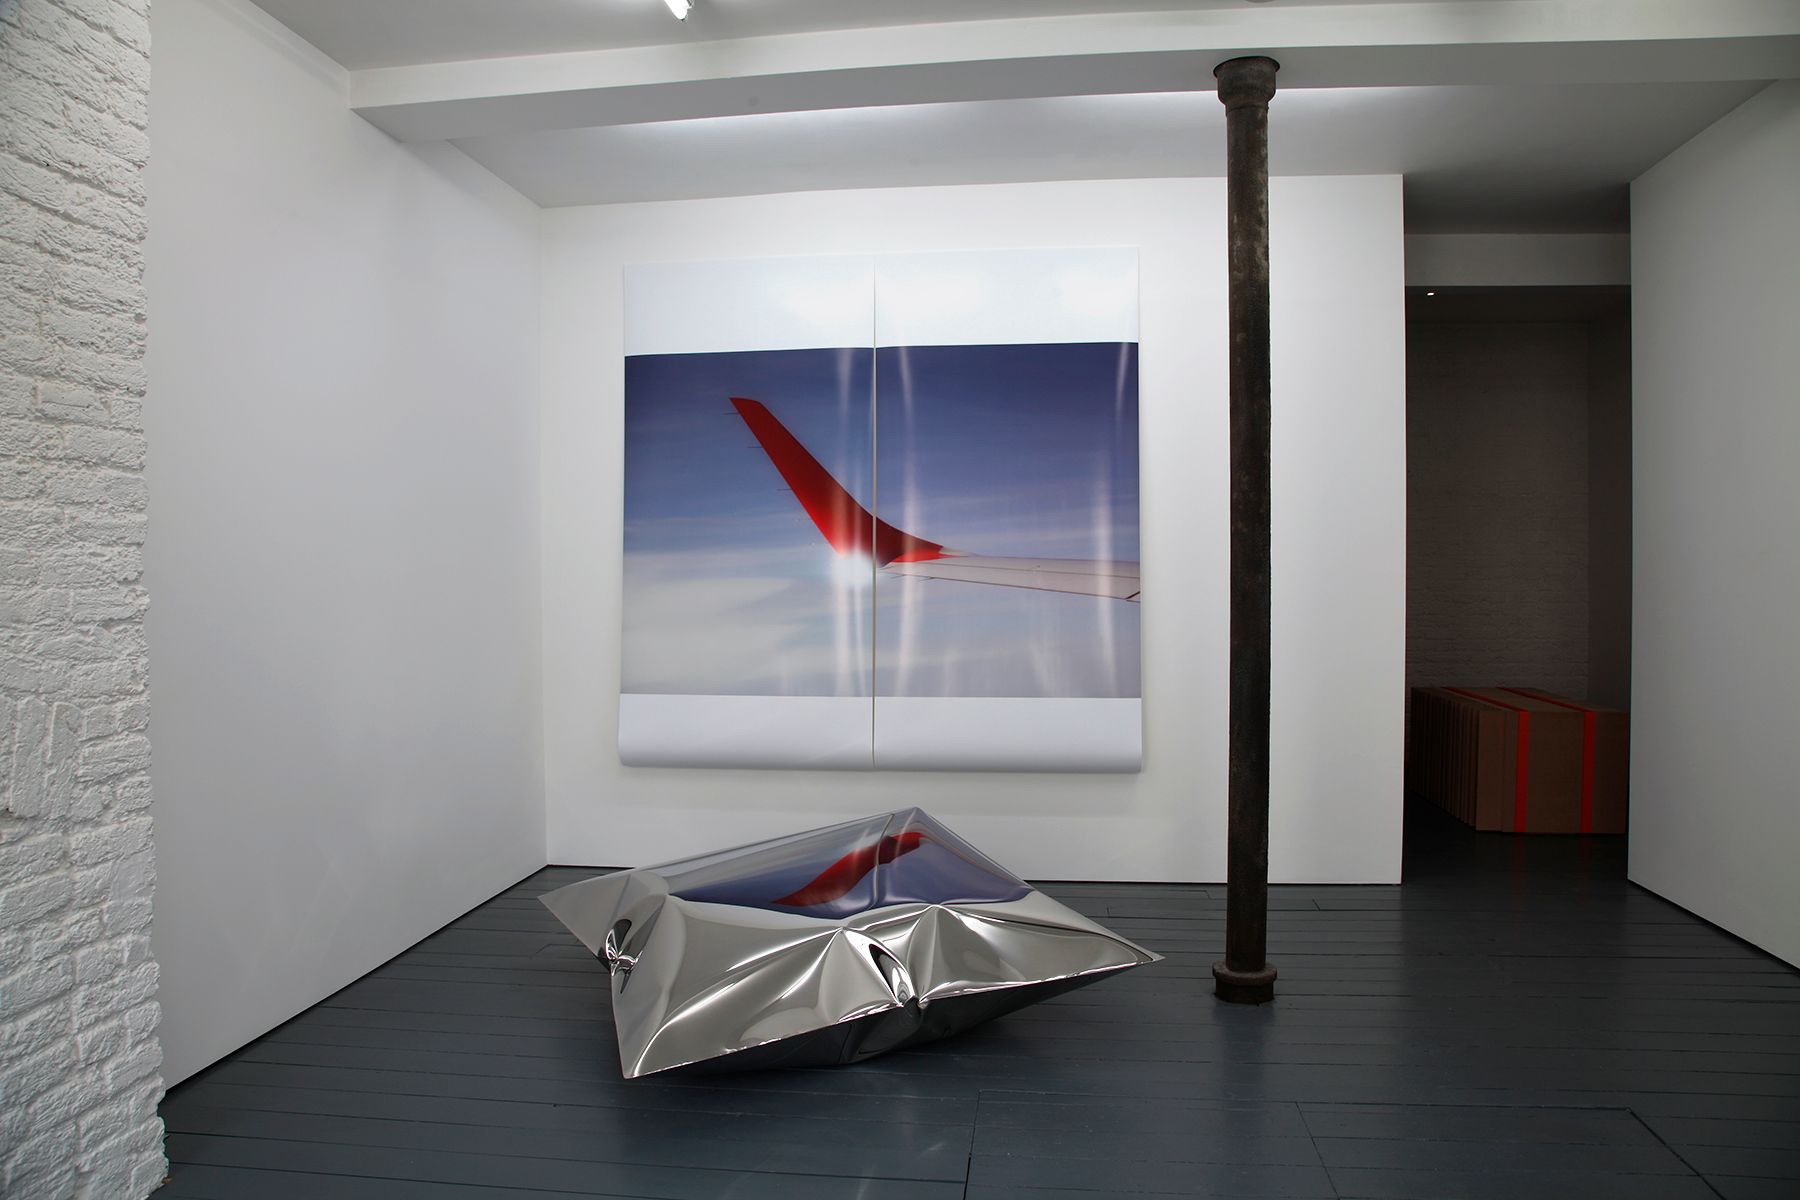 Installation view of untitled with inflated steel form, 2012